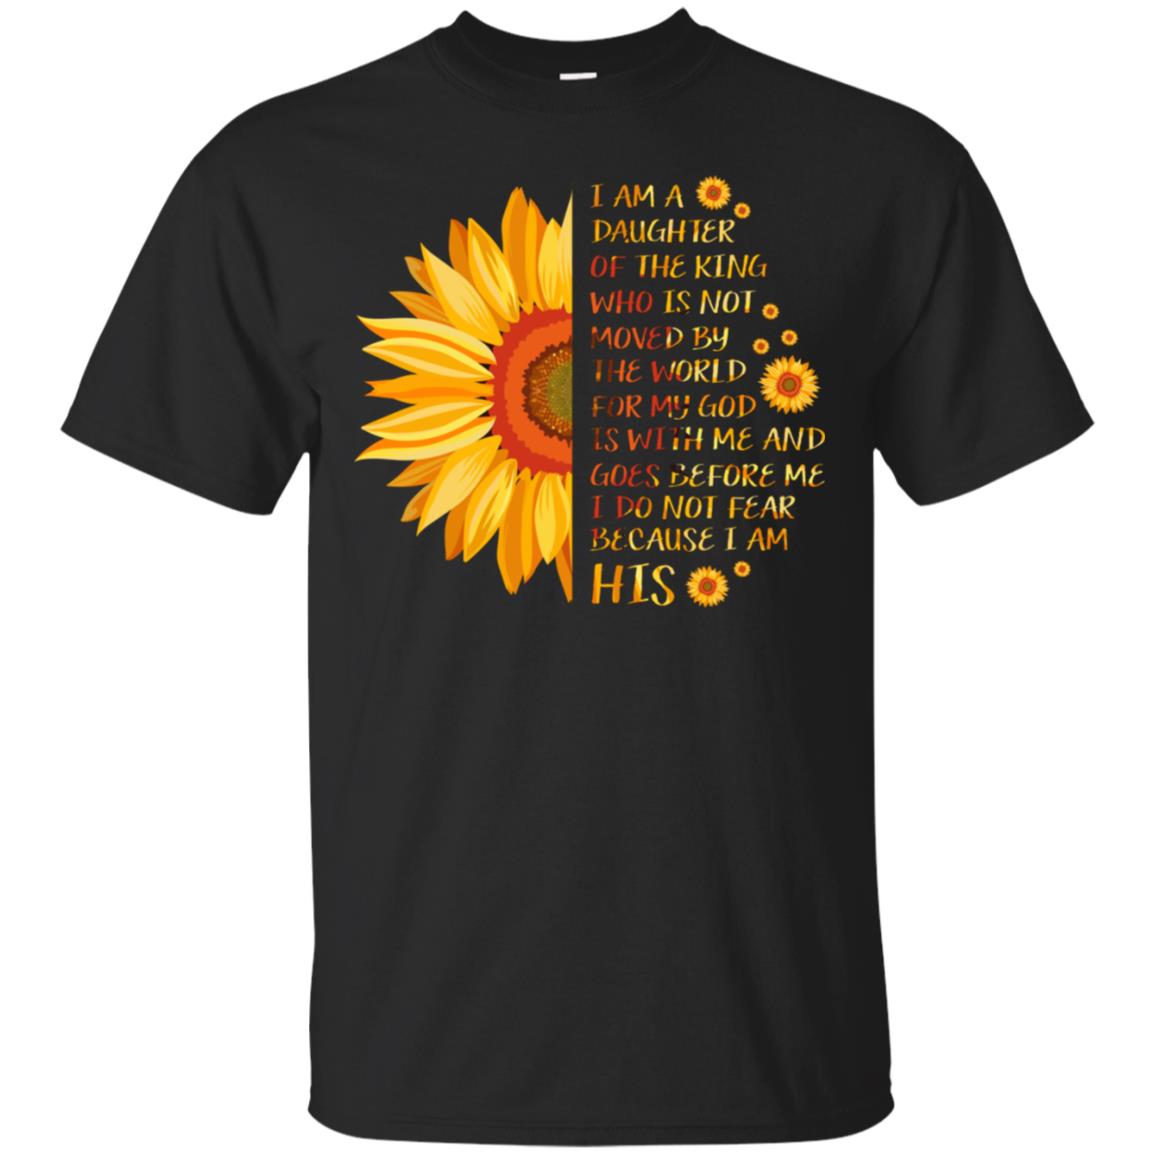 I Am the daughter of A king Who Is Not Moved by The world For My God Is With Me And Goes Before Me I Don't Fear Because i Am hisG200 Gildan Ultra Cotton T-Shirt